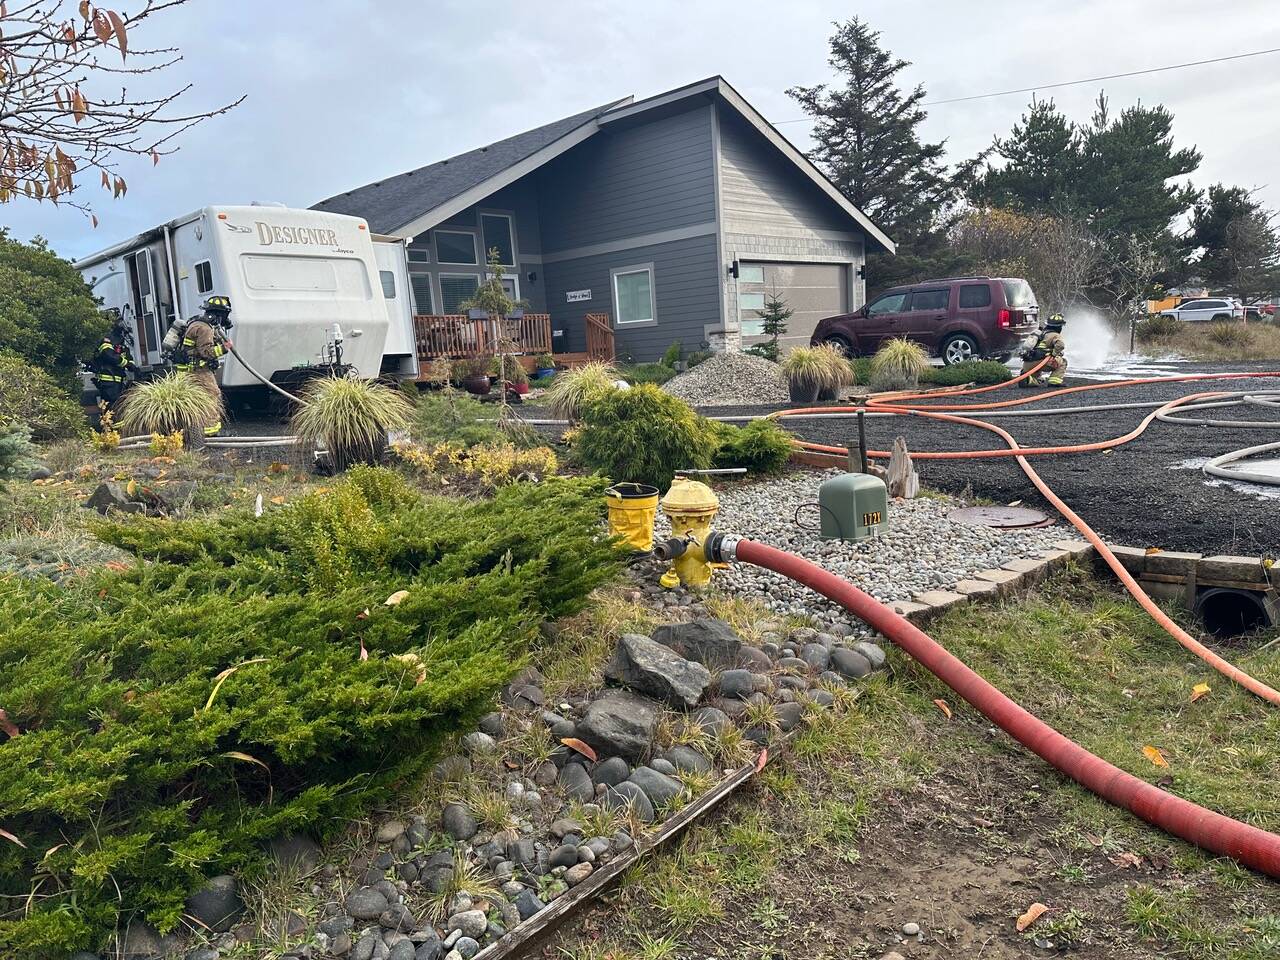 Firefighters from the Ocean Shores Fire Department responded Friday to an RV fire that threatened other buildings. (Courtesy photo / OSFD)